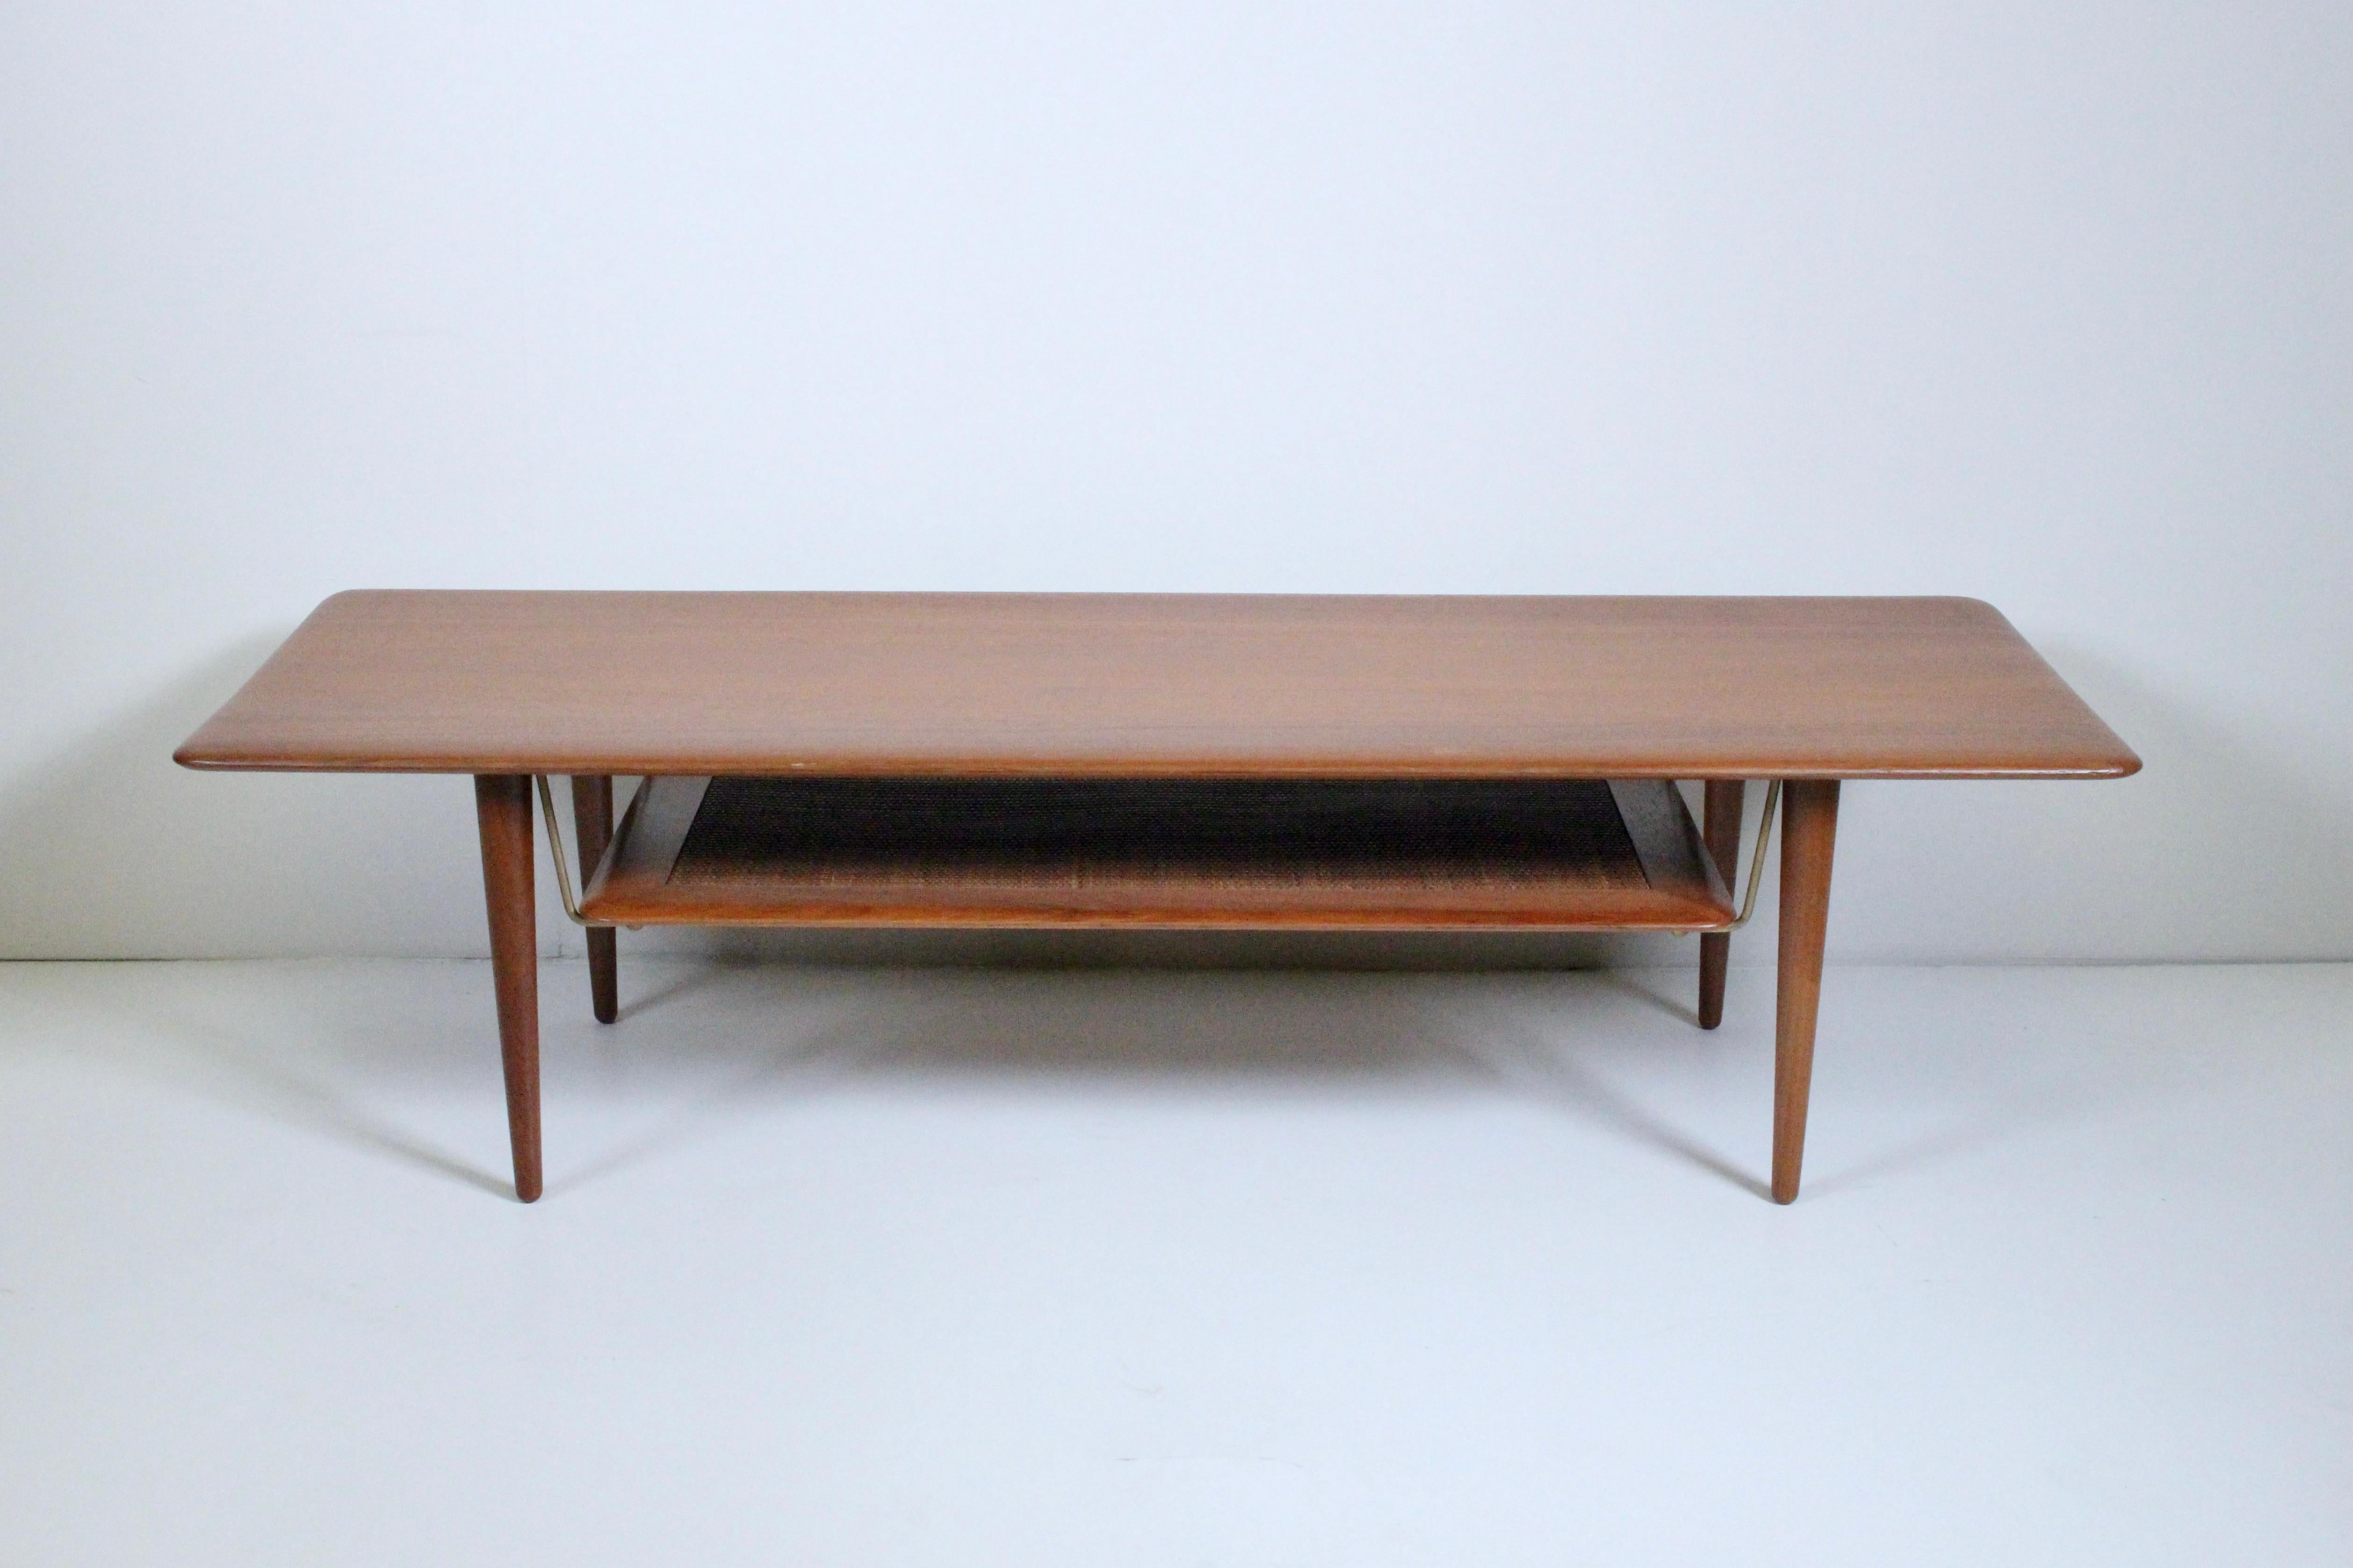 Danish Modern Peter Hvidt & Orla Molgaard Nielsen FD516 Teak Coffee Table. Featuring a rectangular two tier form, four solid turned Teak legs, with smooth, rounded Teak top surface, lower Teak framed Cane shelf detailed with brass fittings. 10